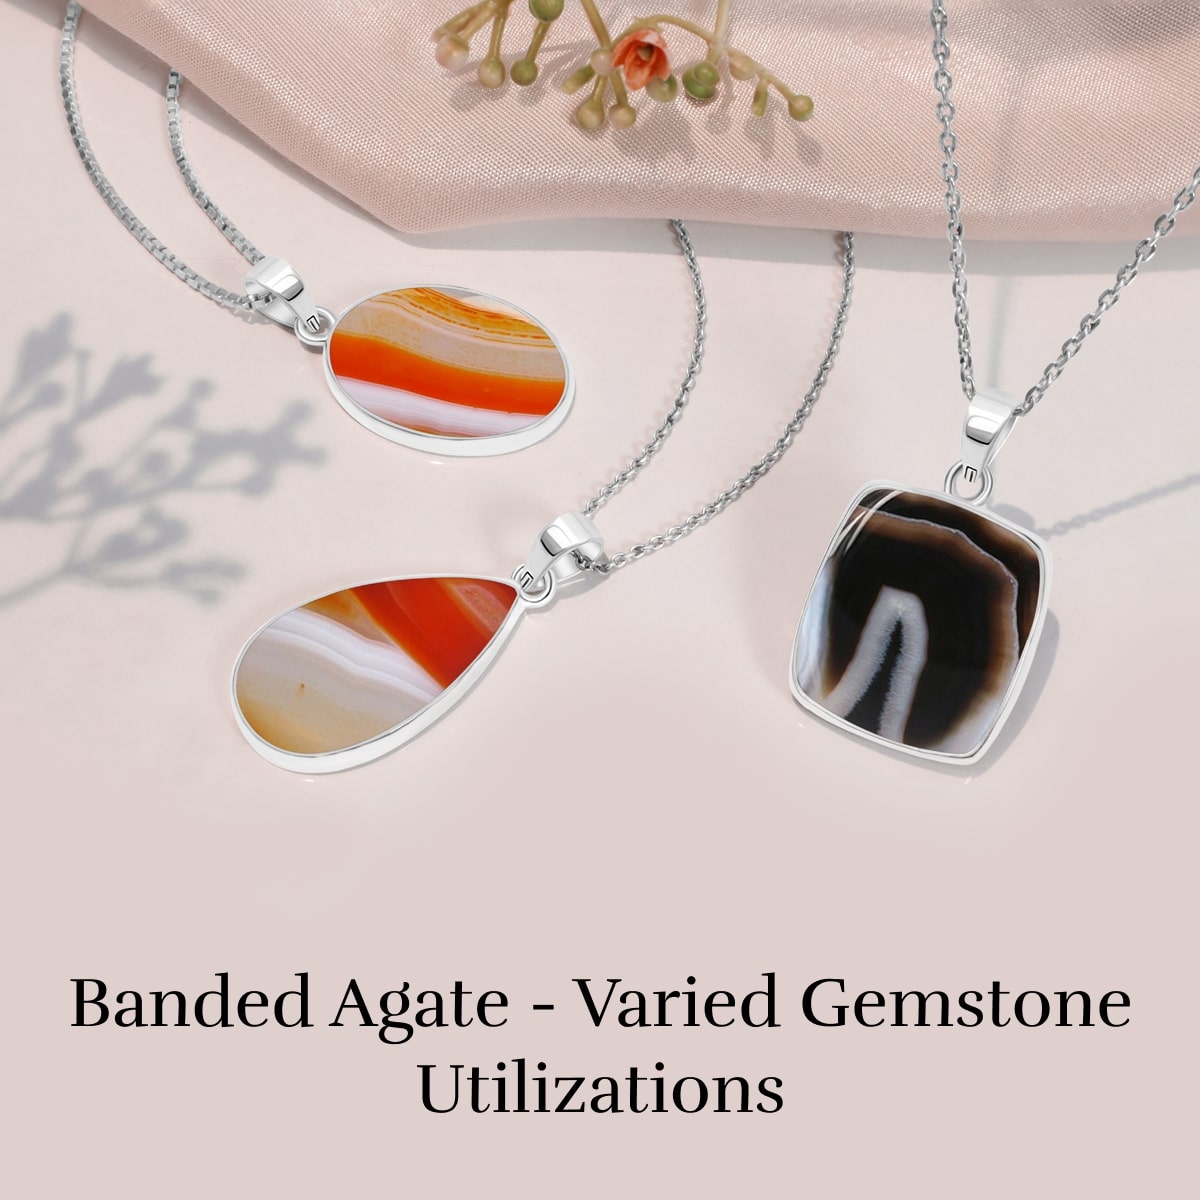 Uses of Banded Agate Gemstone